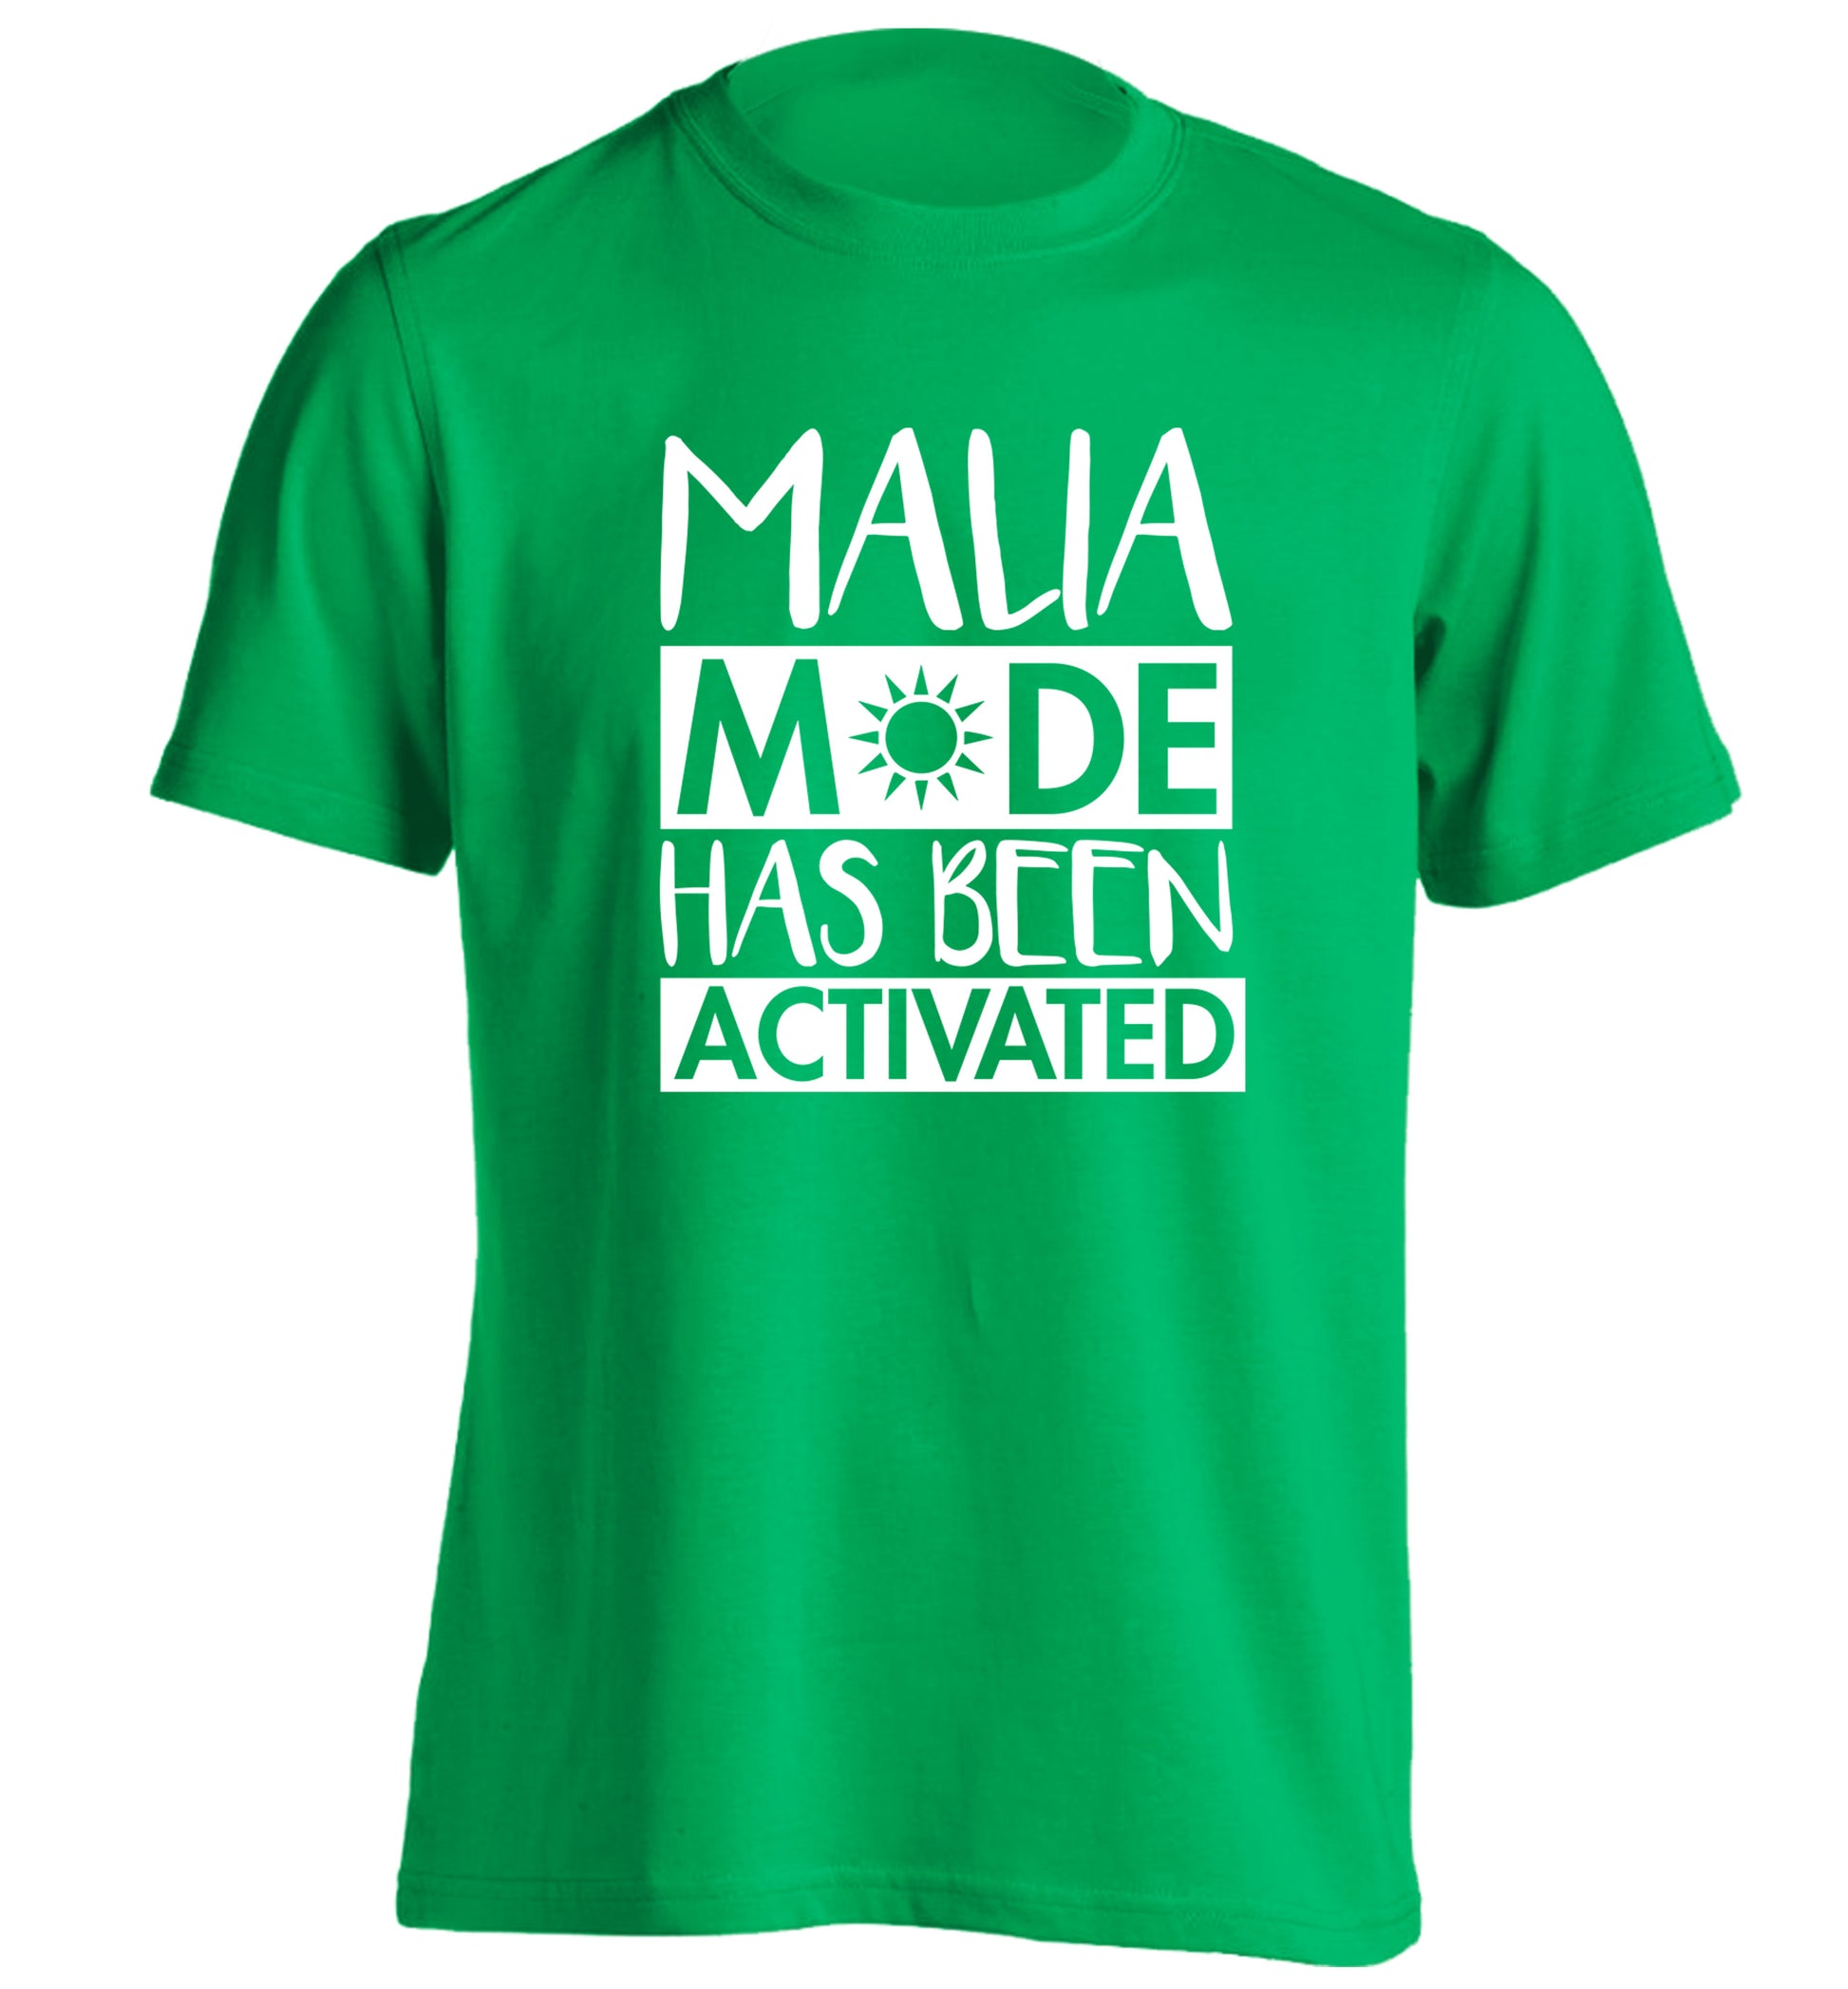 Malia mode has been activated adults unisex green Tshirt 2XL